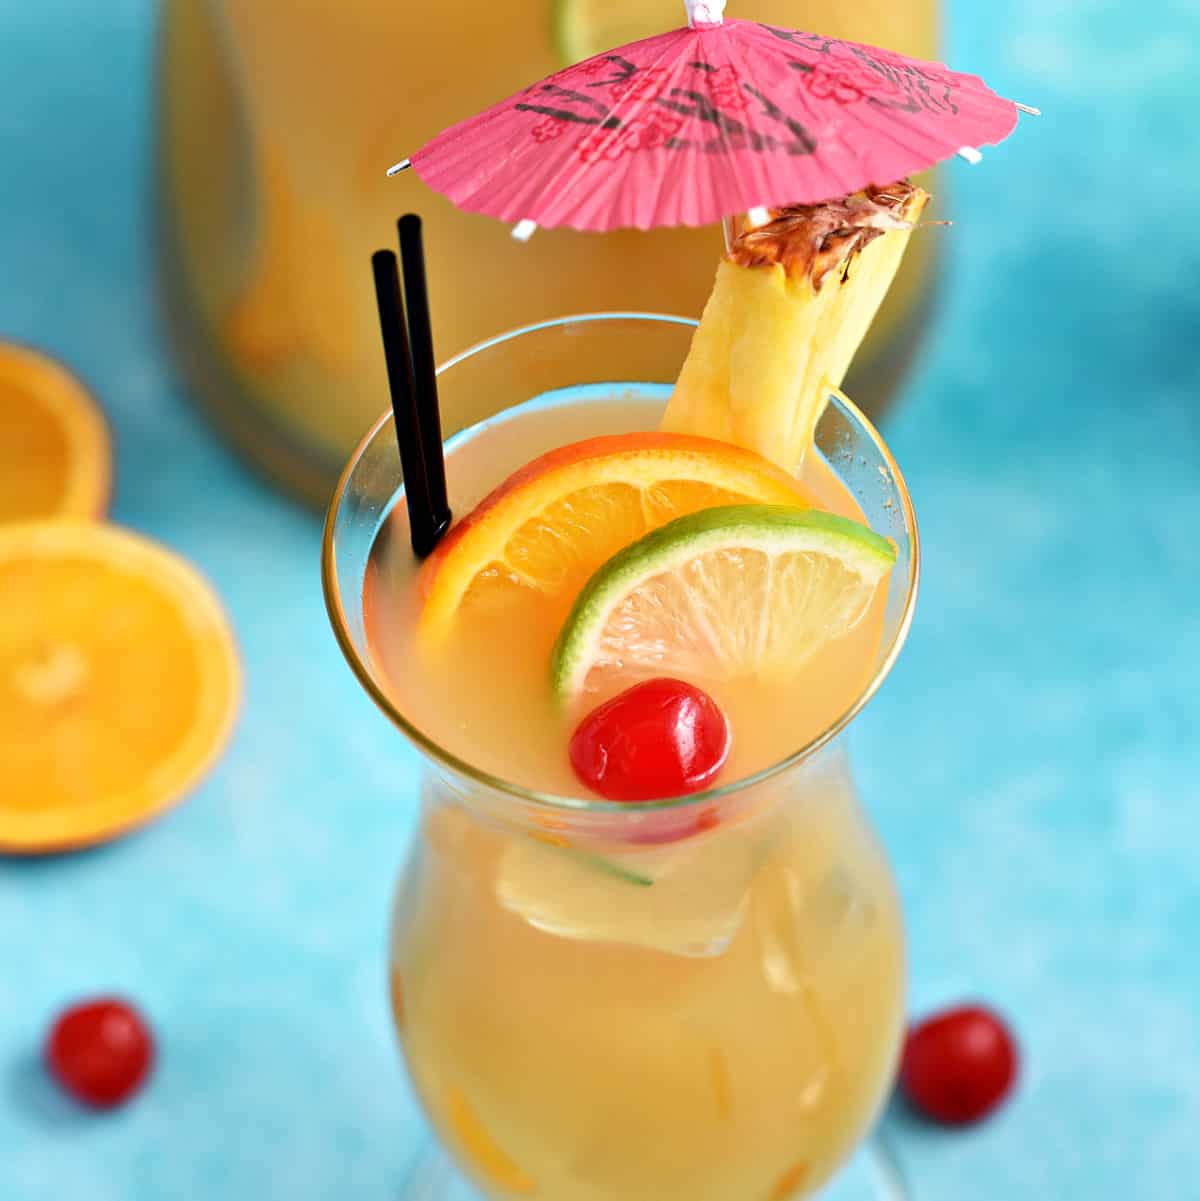 A hurricane glass filled with Jamaican Rum Punch and garnished with slices of orange and lime with a cherry and a pineapple slice with a pink paper umbrella on the rim.